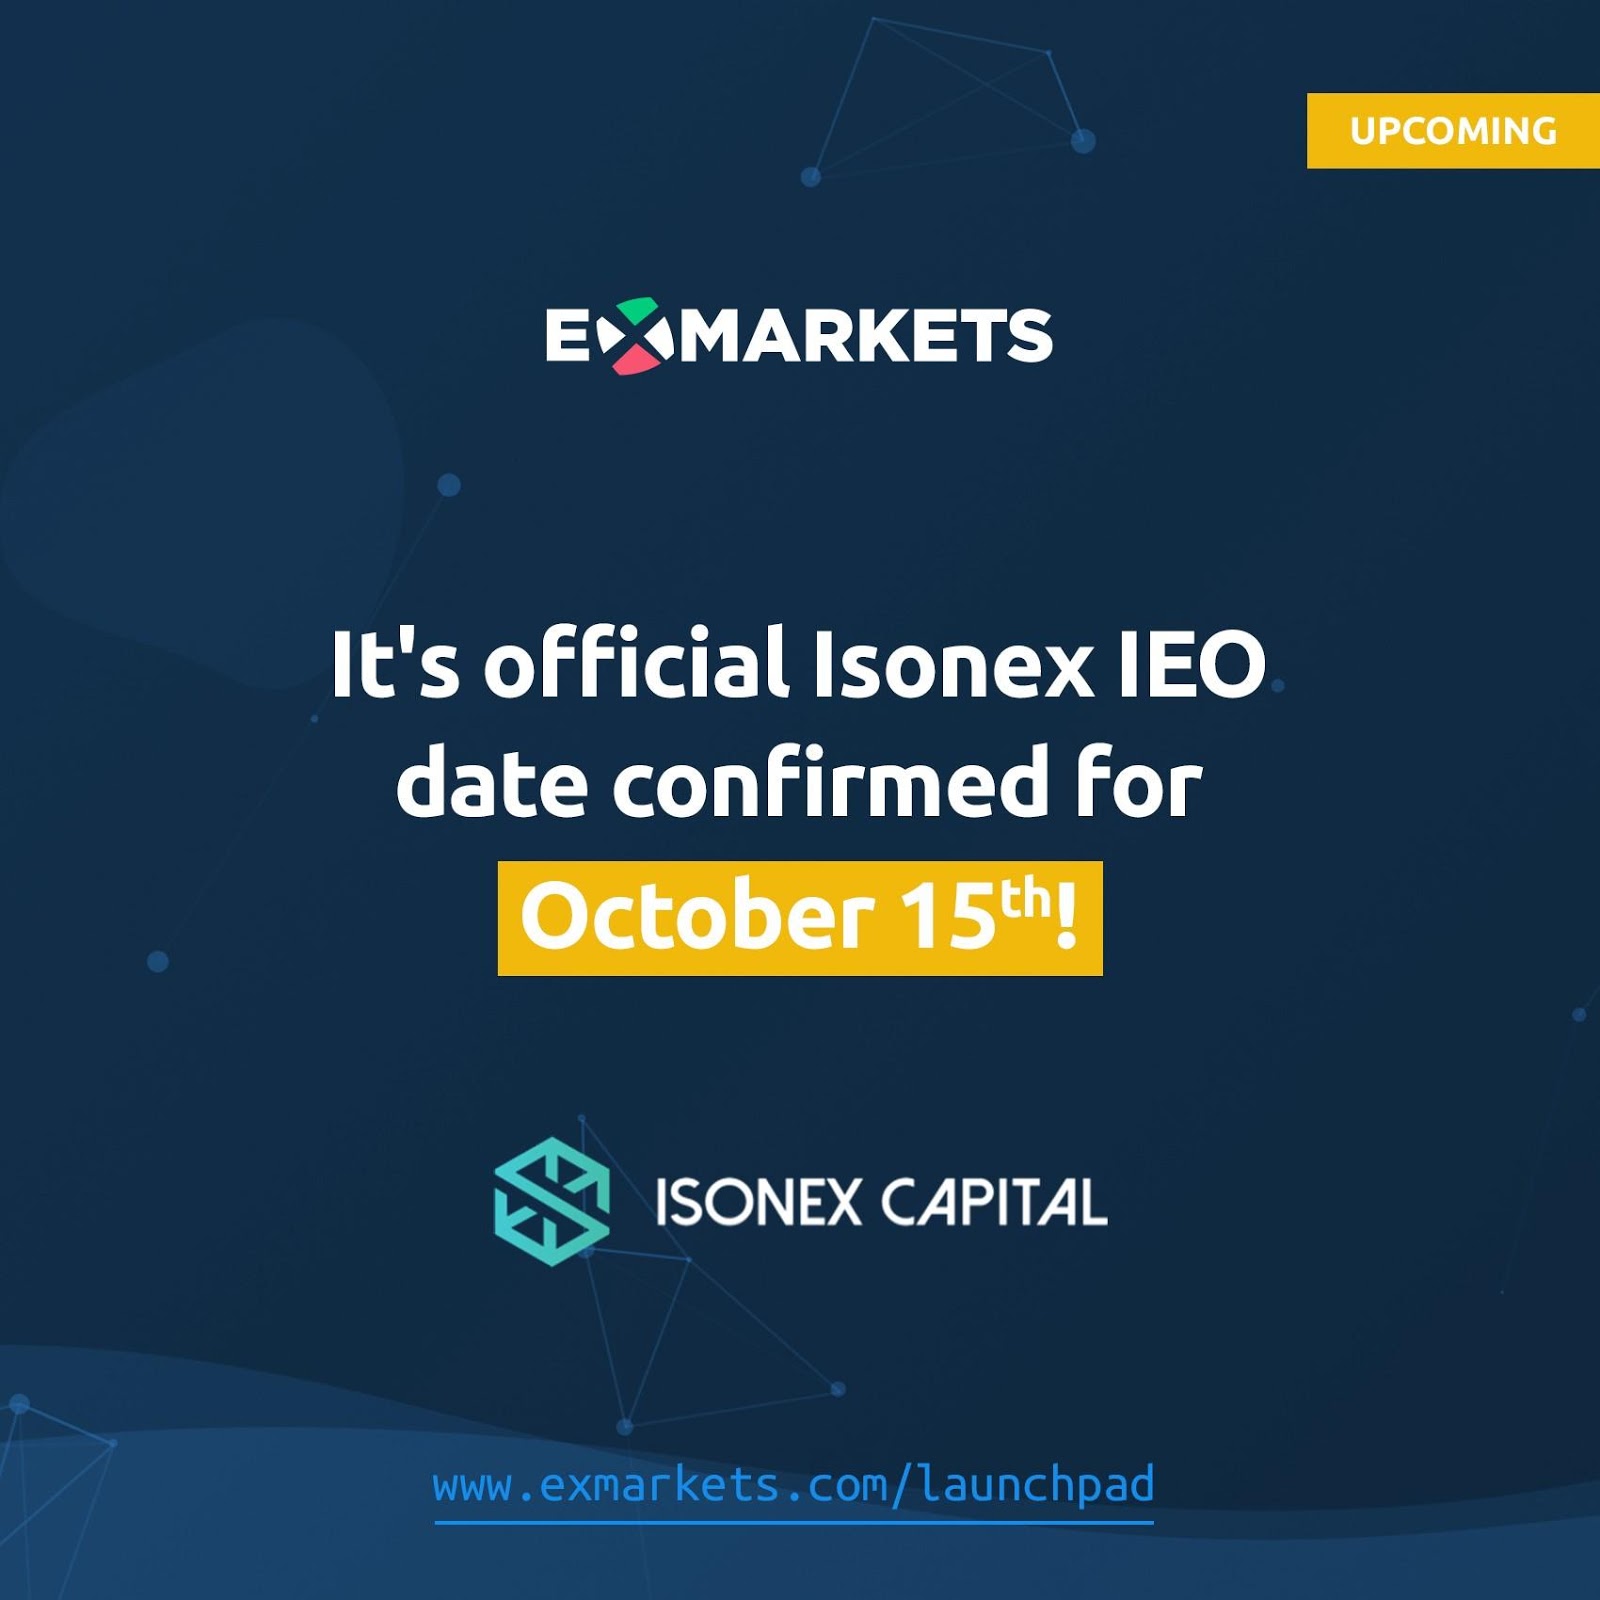 IEO launch date for Isones